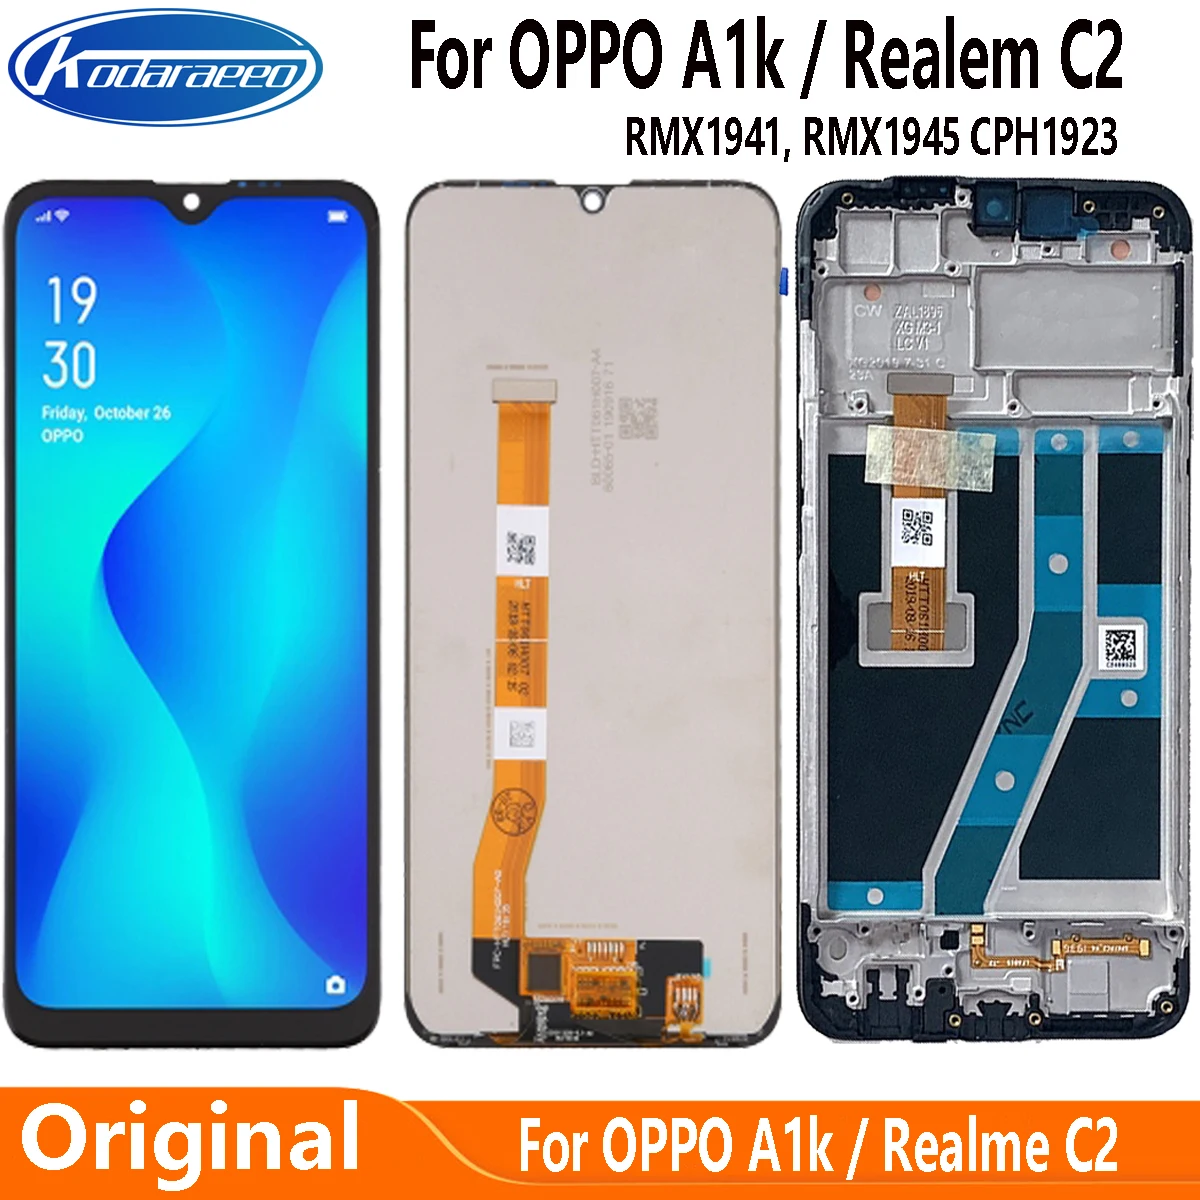 

6.1" Original For OPPO A1K CPH1923 LCD Display Touch Screen Replacement Digitizer Assembly For Realme C2 RMX1941 RMX1945 LCD